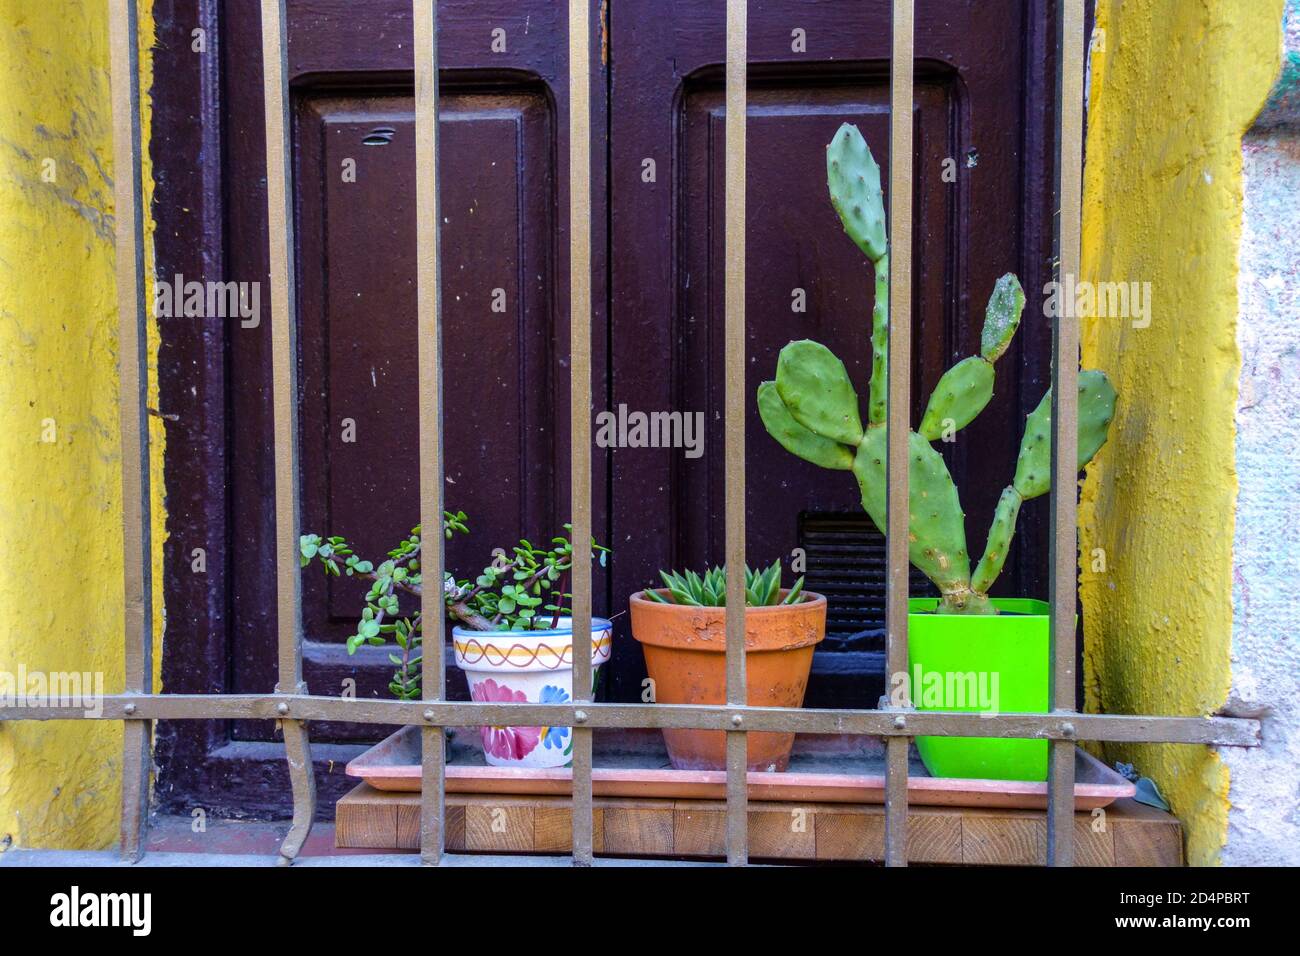 Cactus in pot succulents in pots window grille with a wrought iron fence, Spain houseplant Desert home plants, Stock Photo